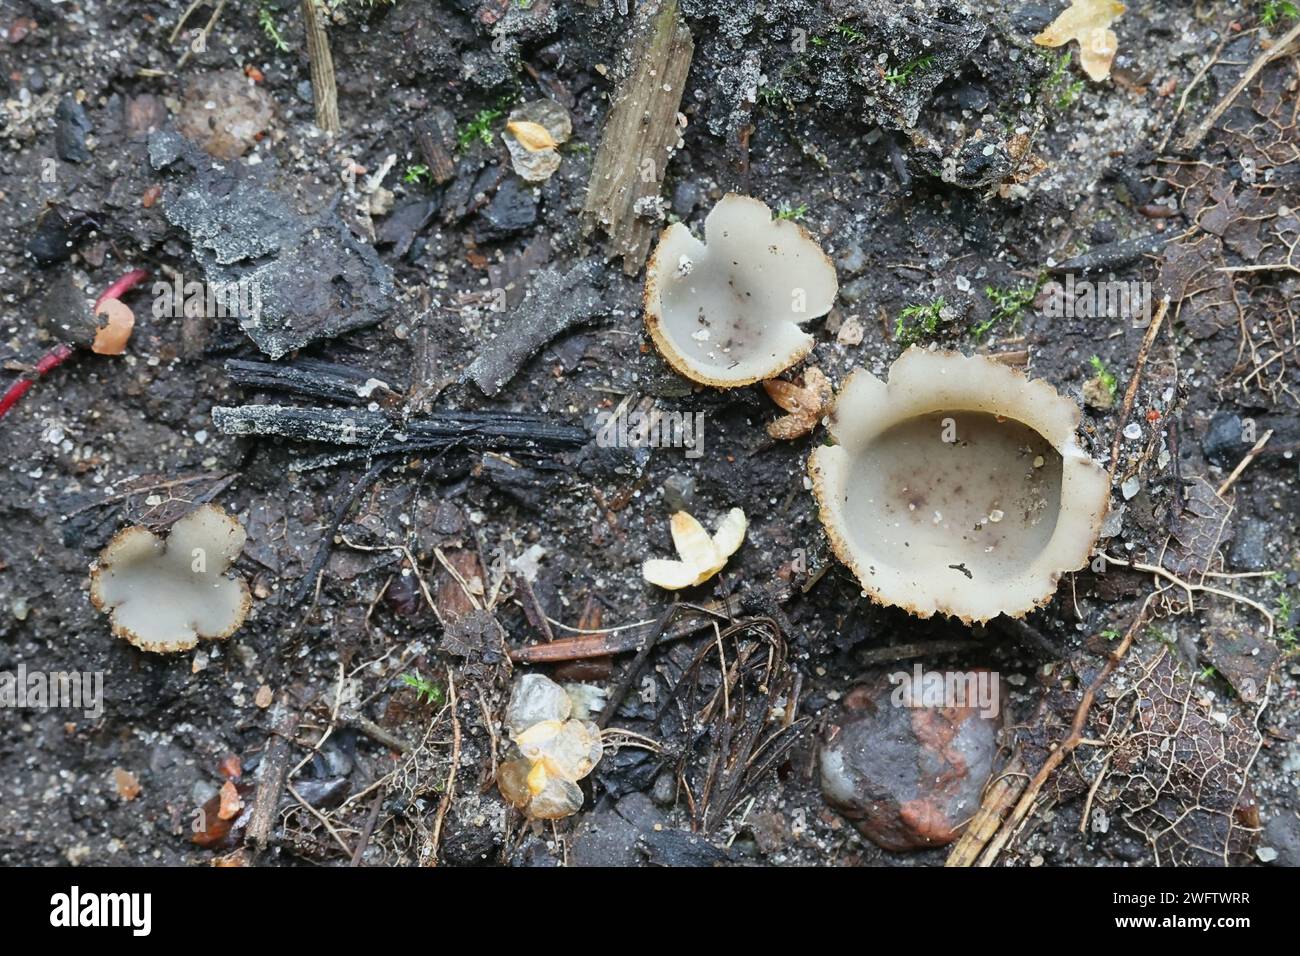 Geopora arenicola, a half-buried cup fungus from Finland, no common English name Stock Photo